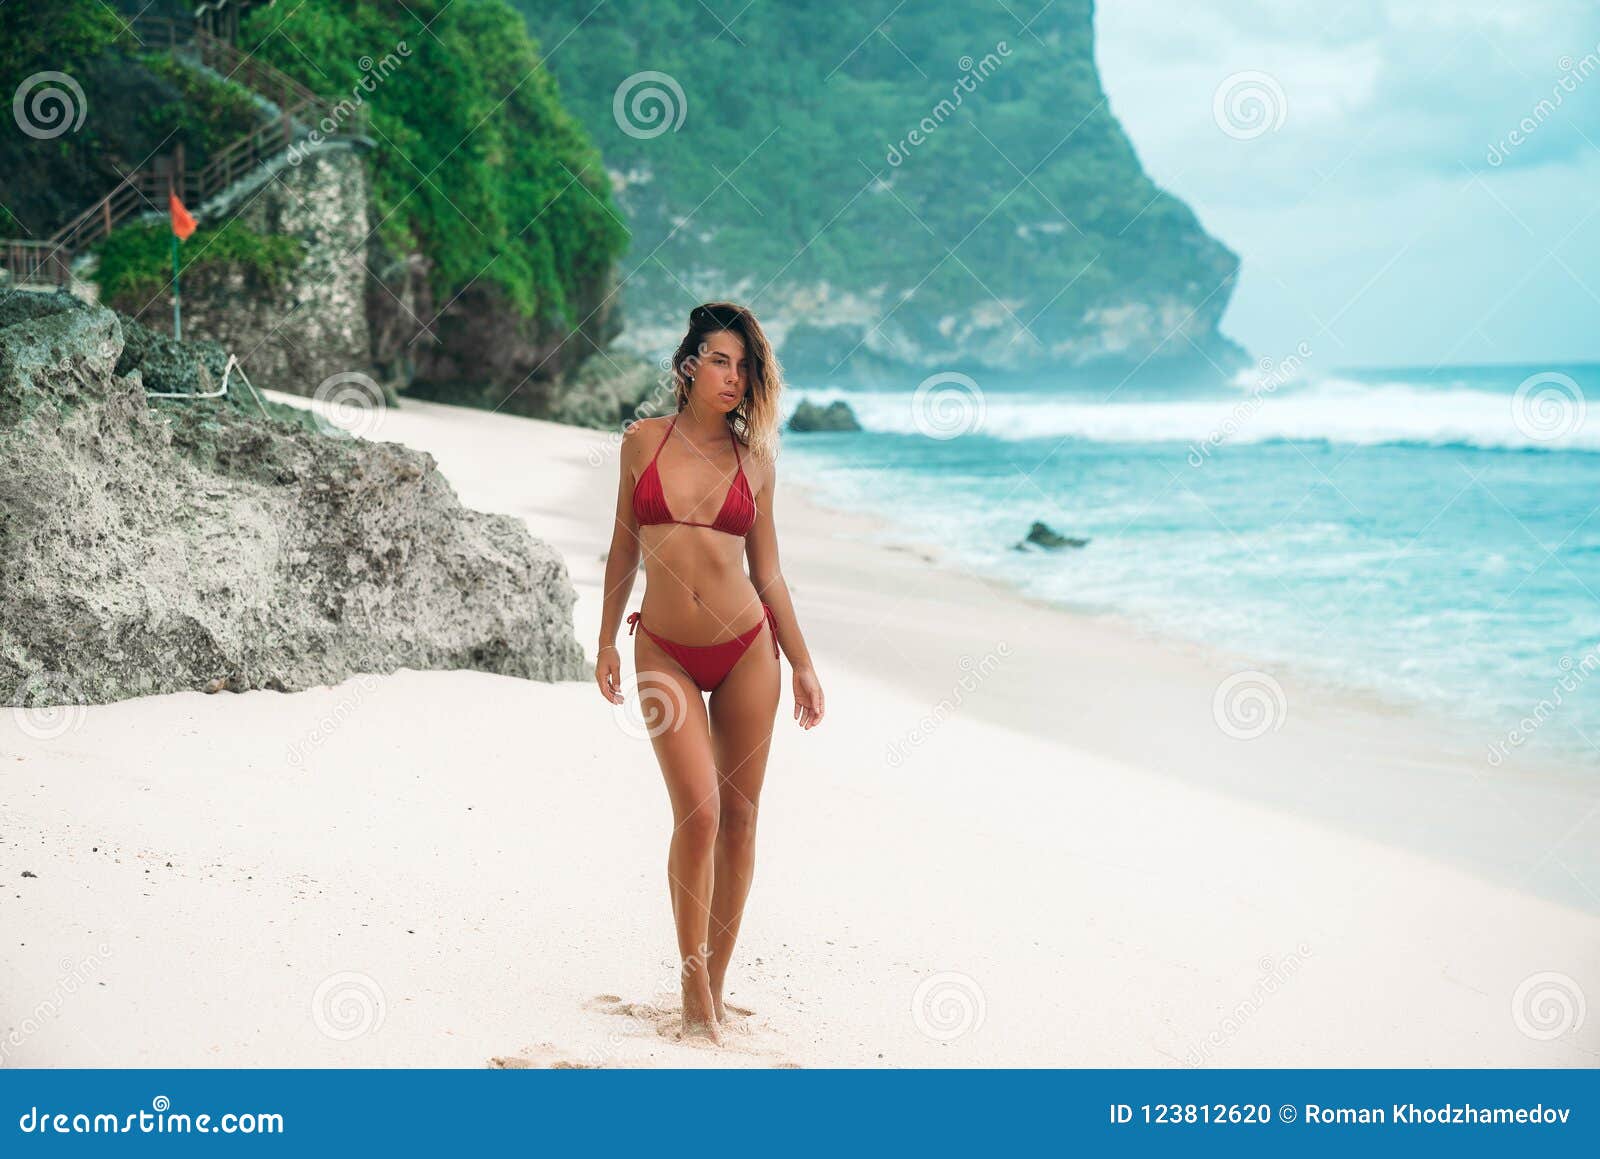 Amazing Girl with Body is Engaged in Fitness on the White Sand Beach